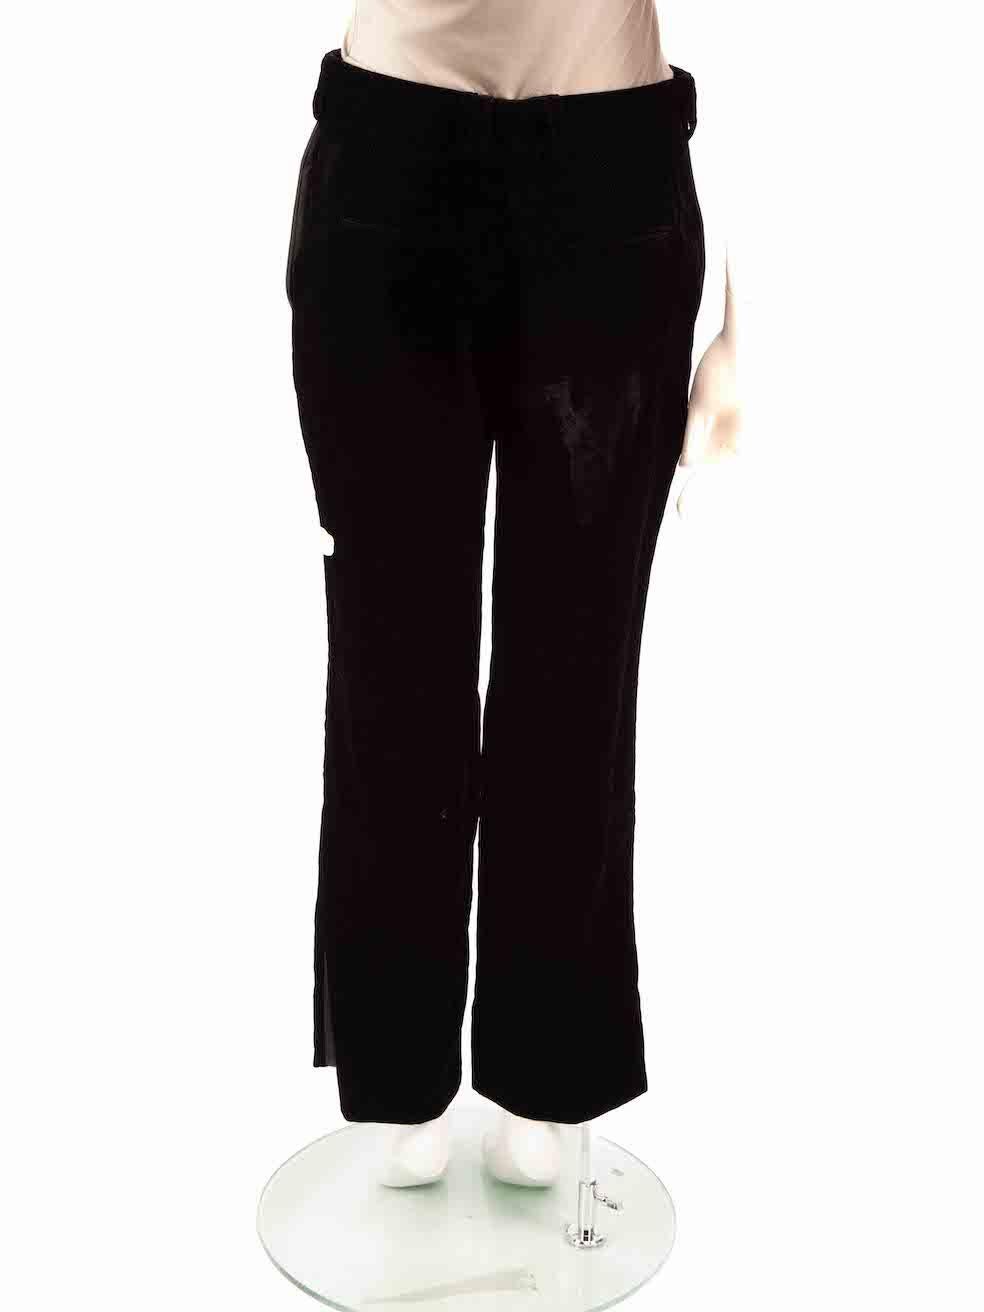 Saint Laurent Black Velvet High Waisted Trousers Size M In Good Condition For Sale In London, GB